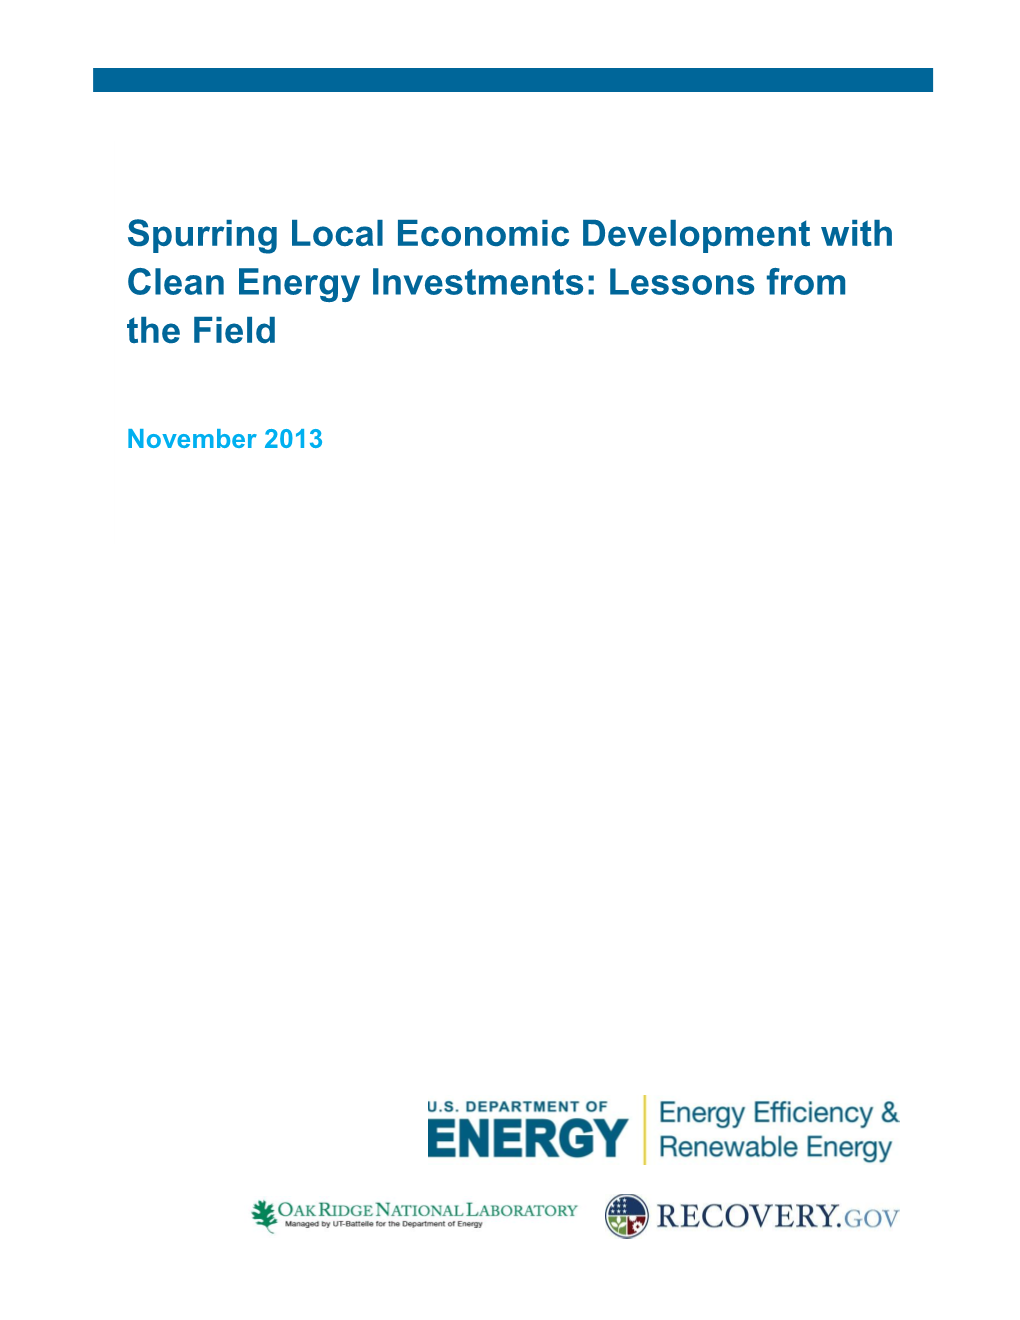 Spurring Local Economic Development with Clean Energy Investments: Lessons from the Field